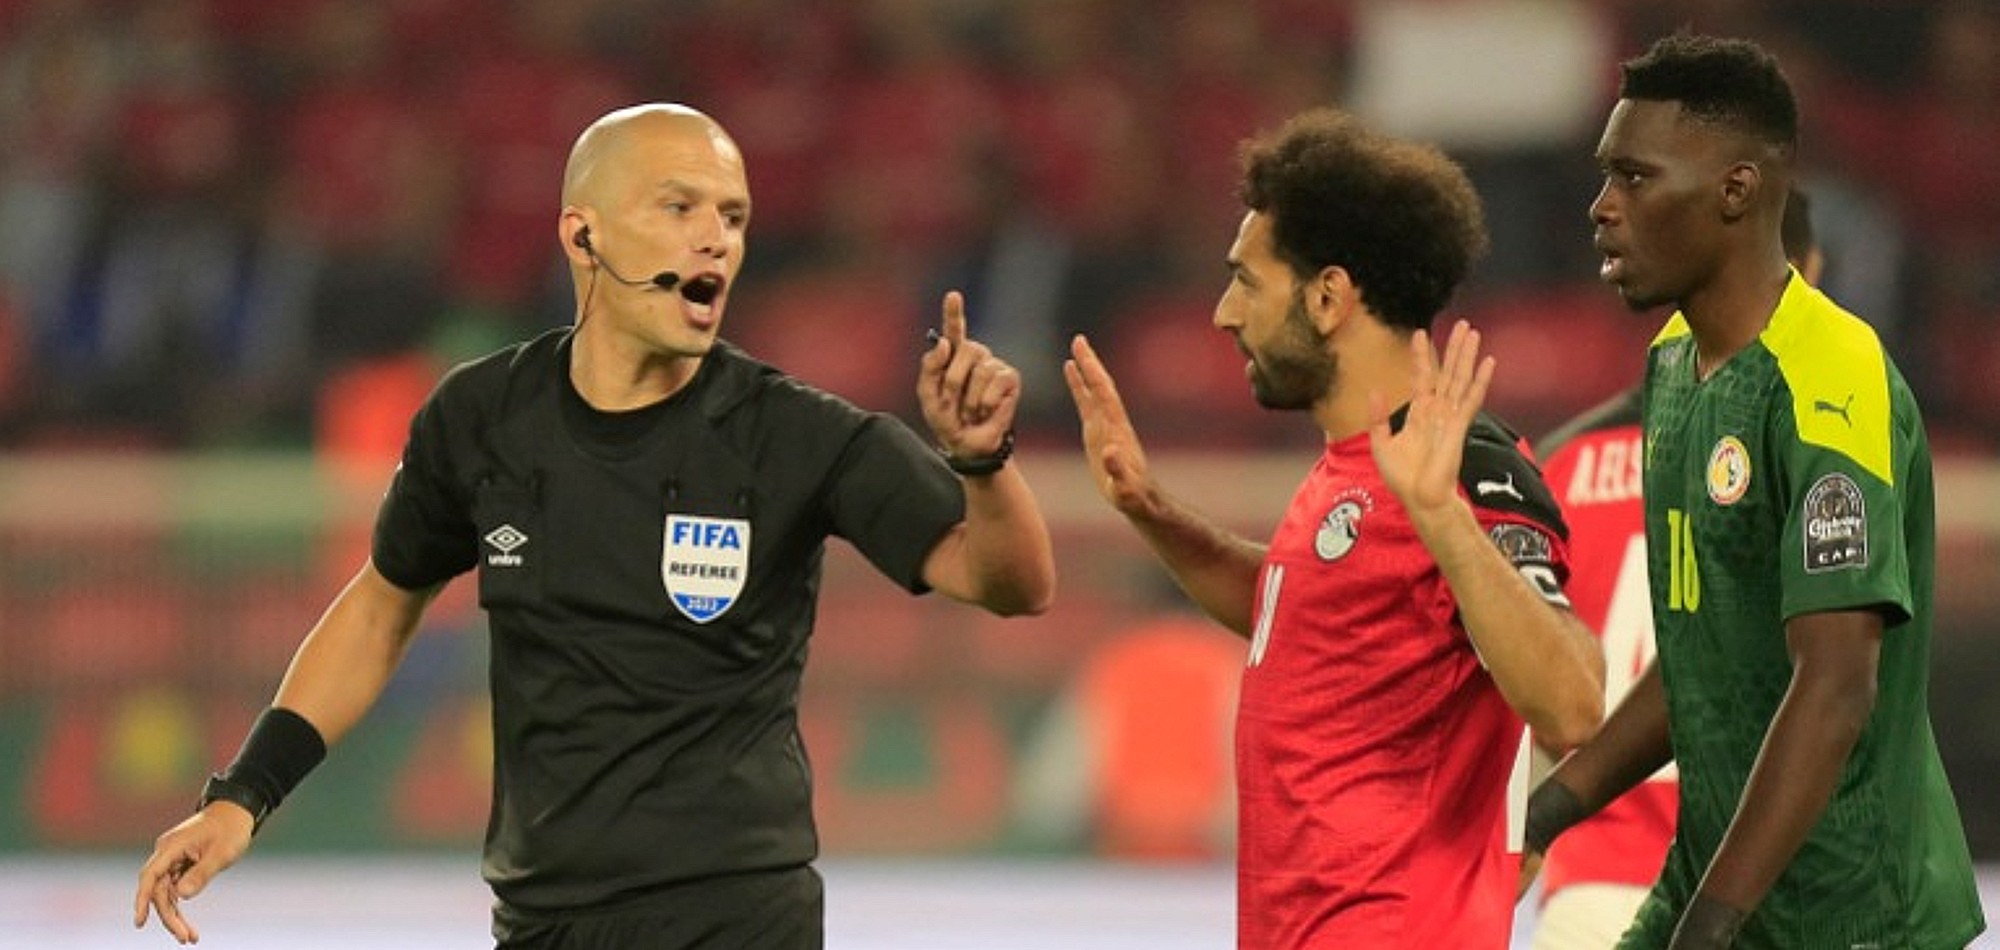 Meet the referees taking charge of World Cup Qatar 2022